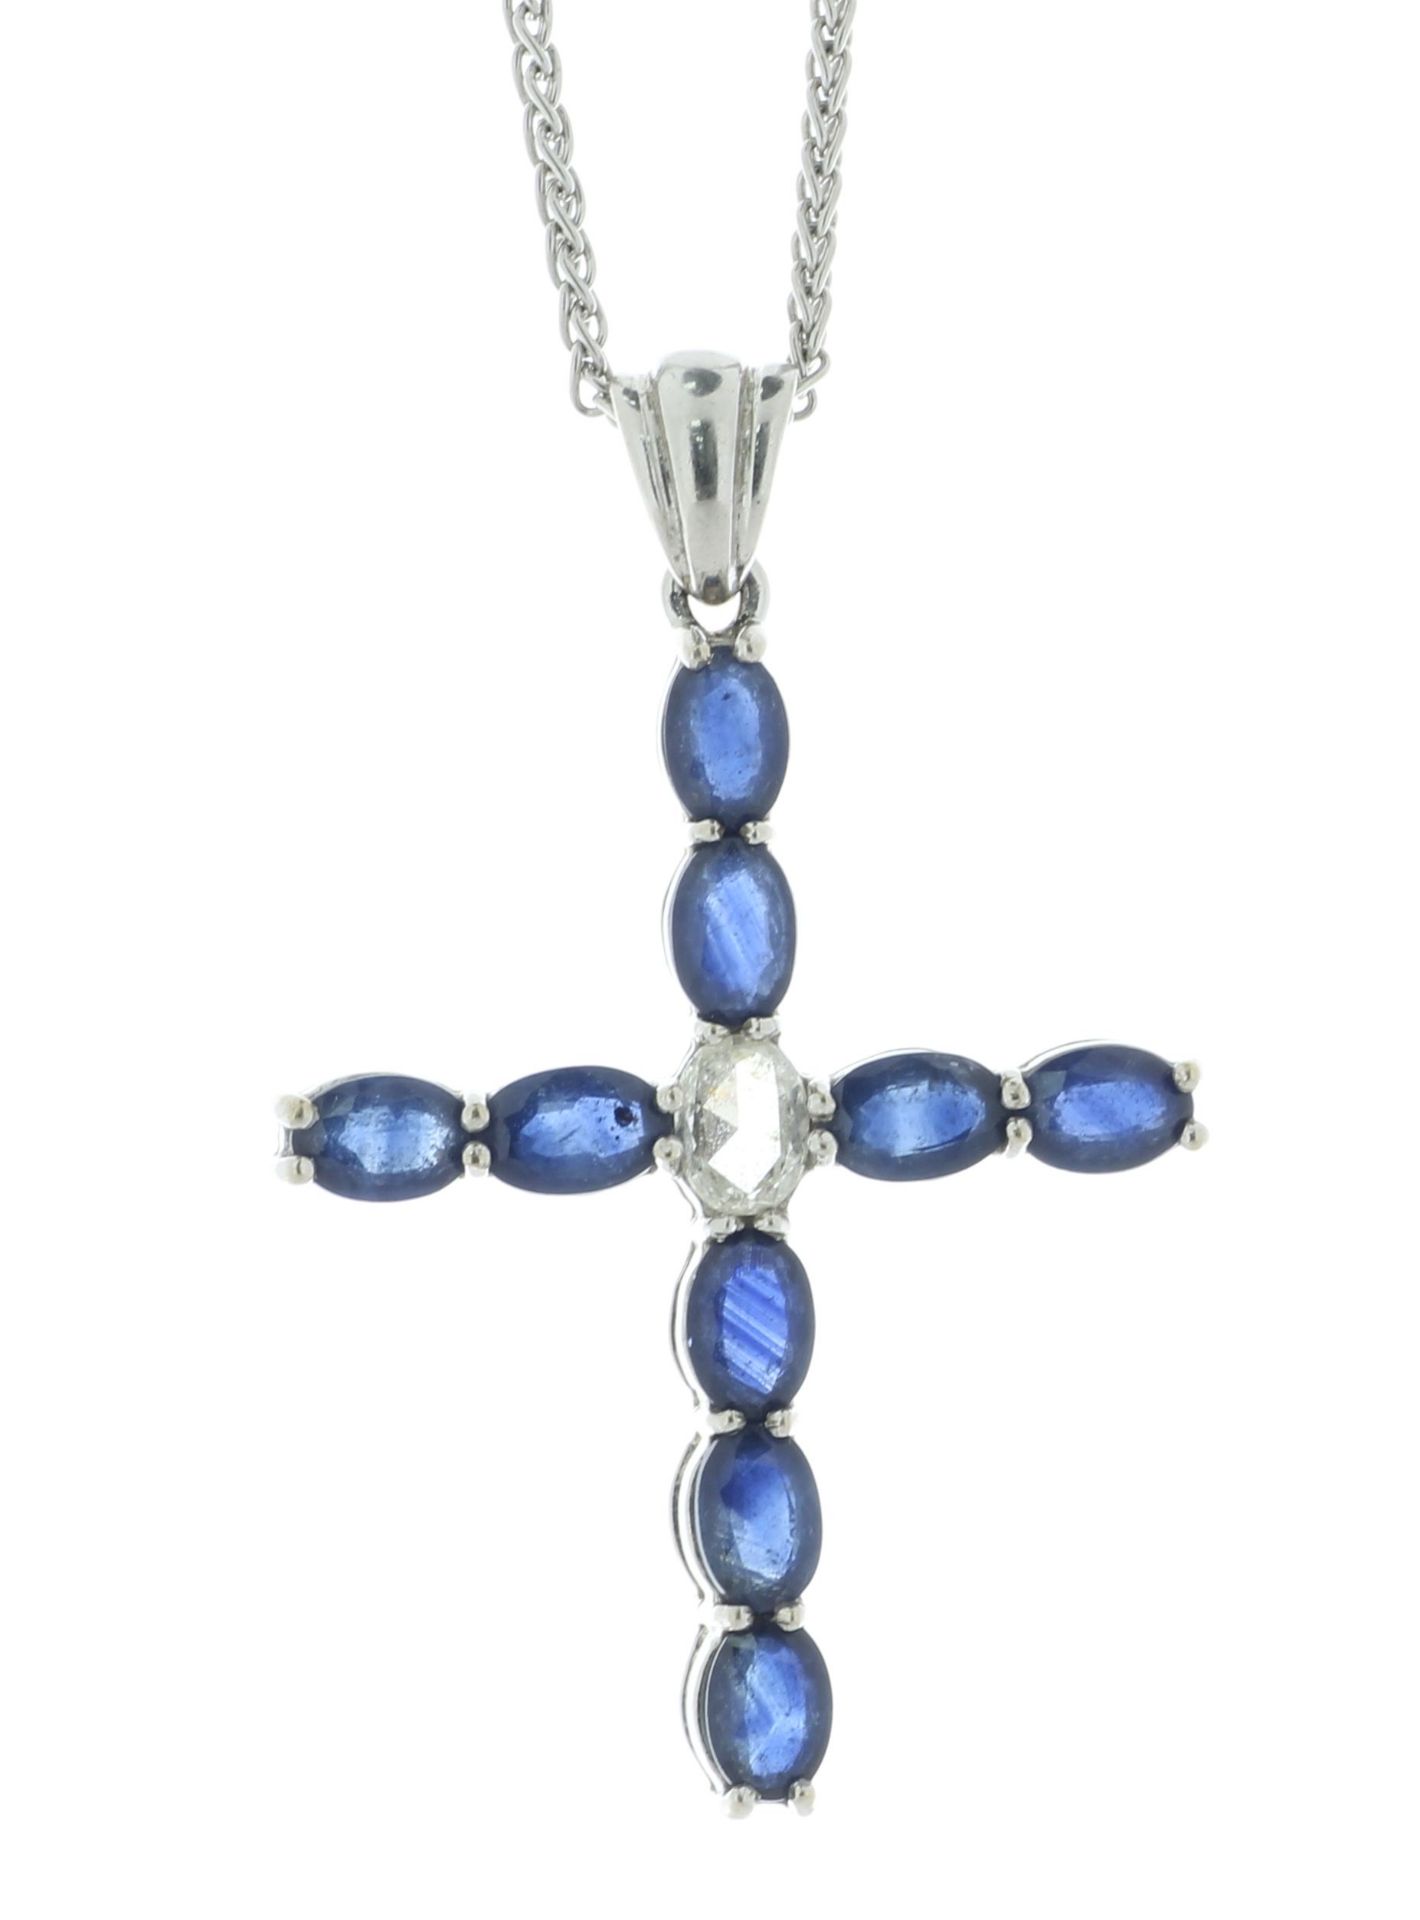 18ct White Gold Diamond And Sapphire Cross Pendant And 18" Chain (S4.23) 0.32 Carats